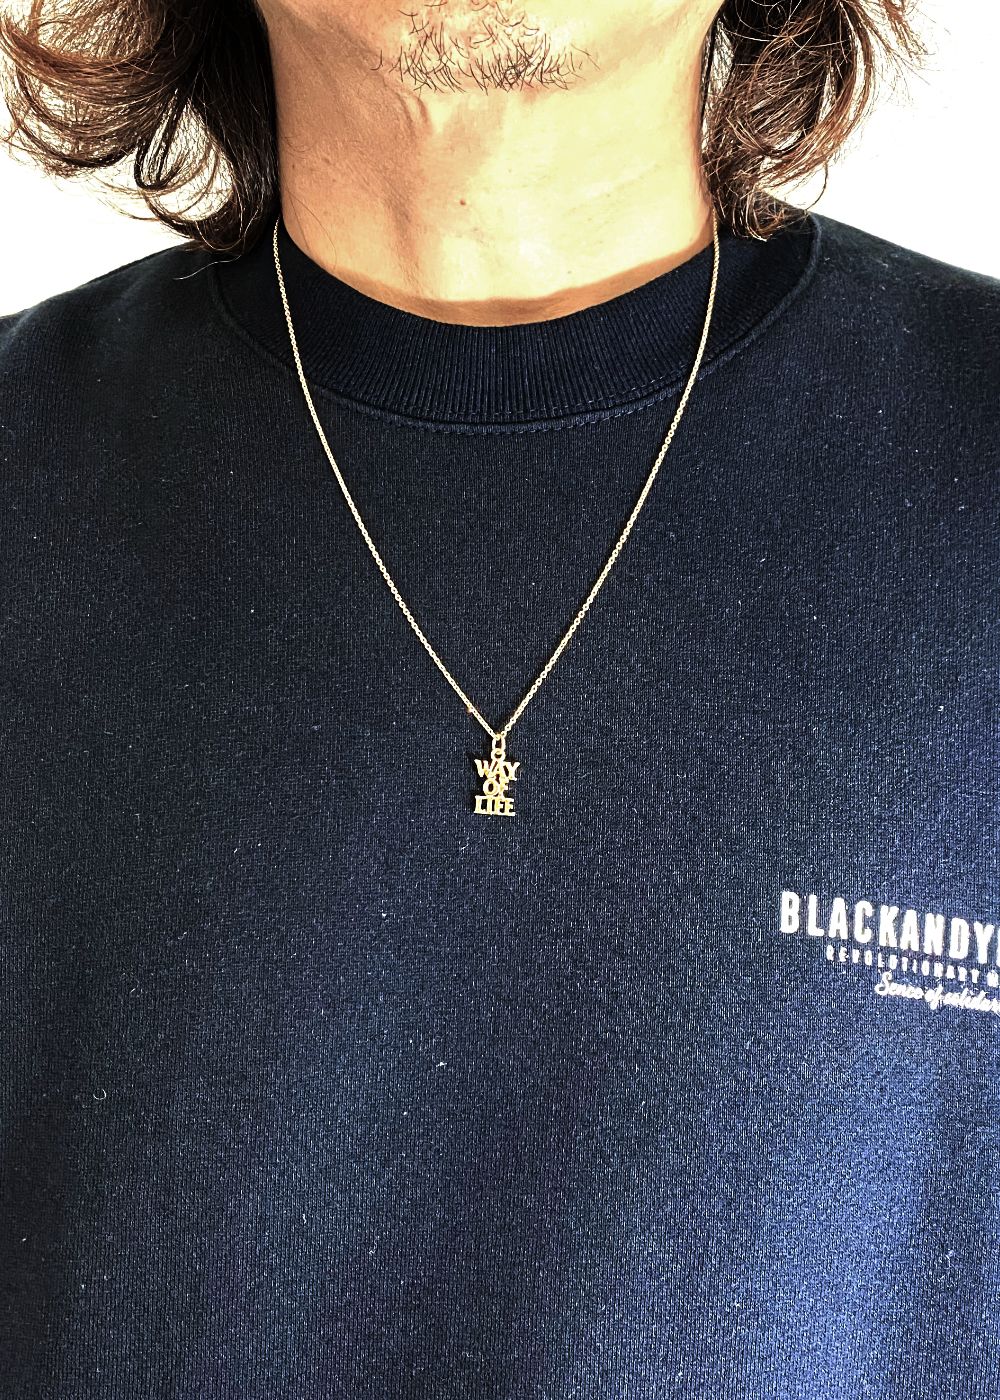 RATS - 【ラスト1点】NECKLACE WAY OF LIFE 18K GOLD (GOLD